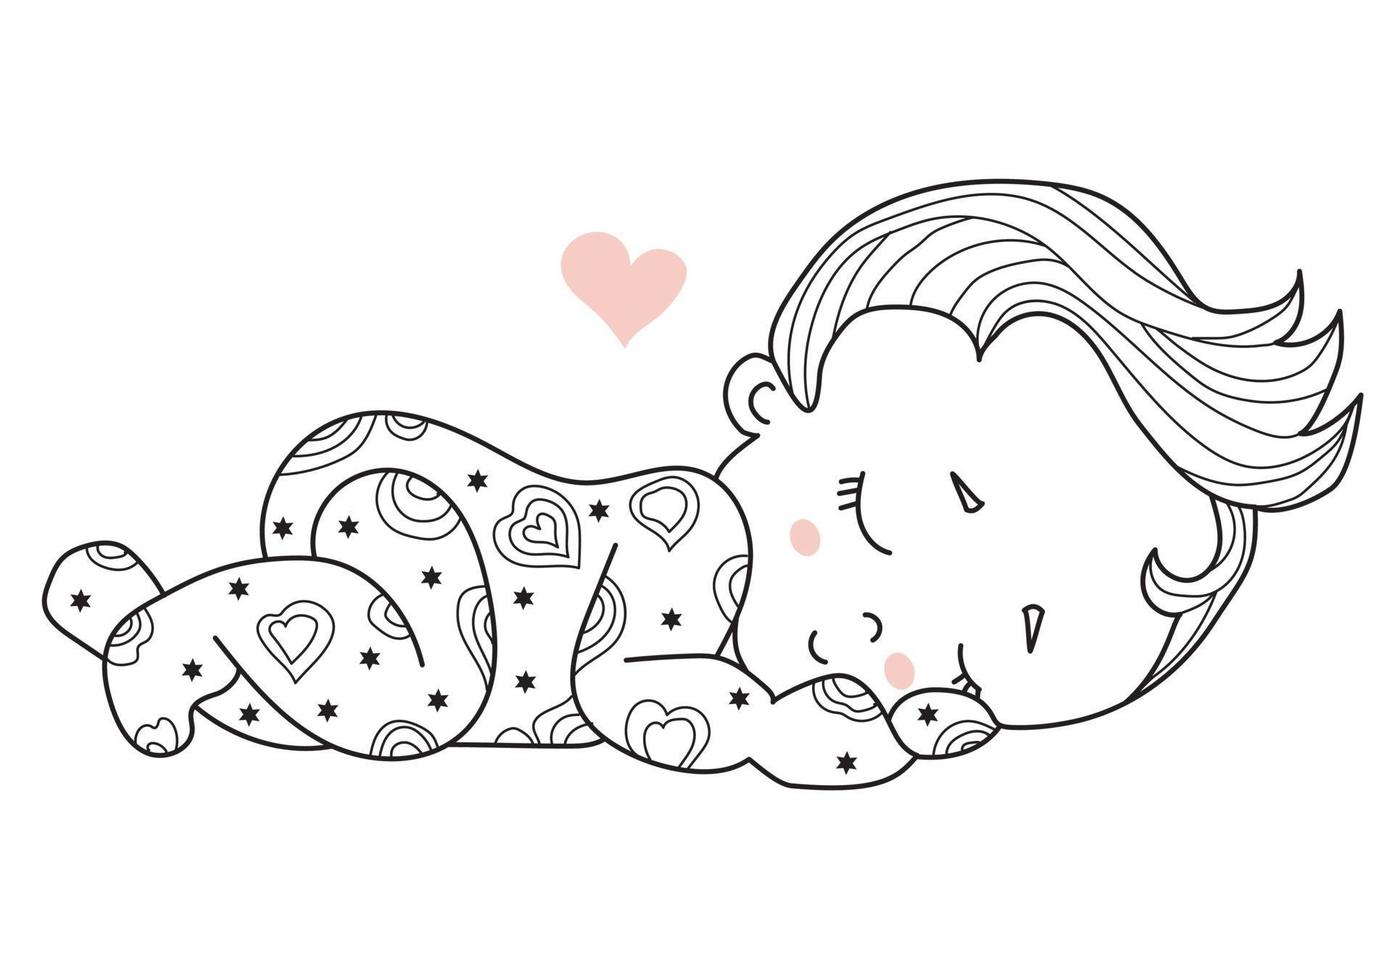 Childrens collection. Cute little baby sleeping sweetly. sweet dream. Decorative vector illustration. Outline. Isolated on white.For childrens design, postcards, decoration and decor